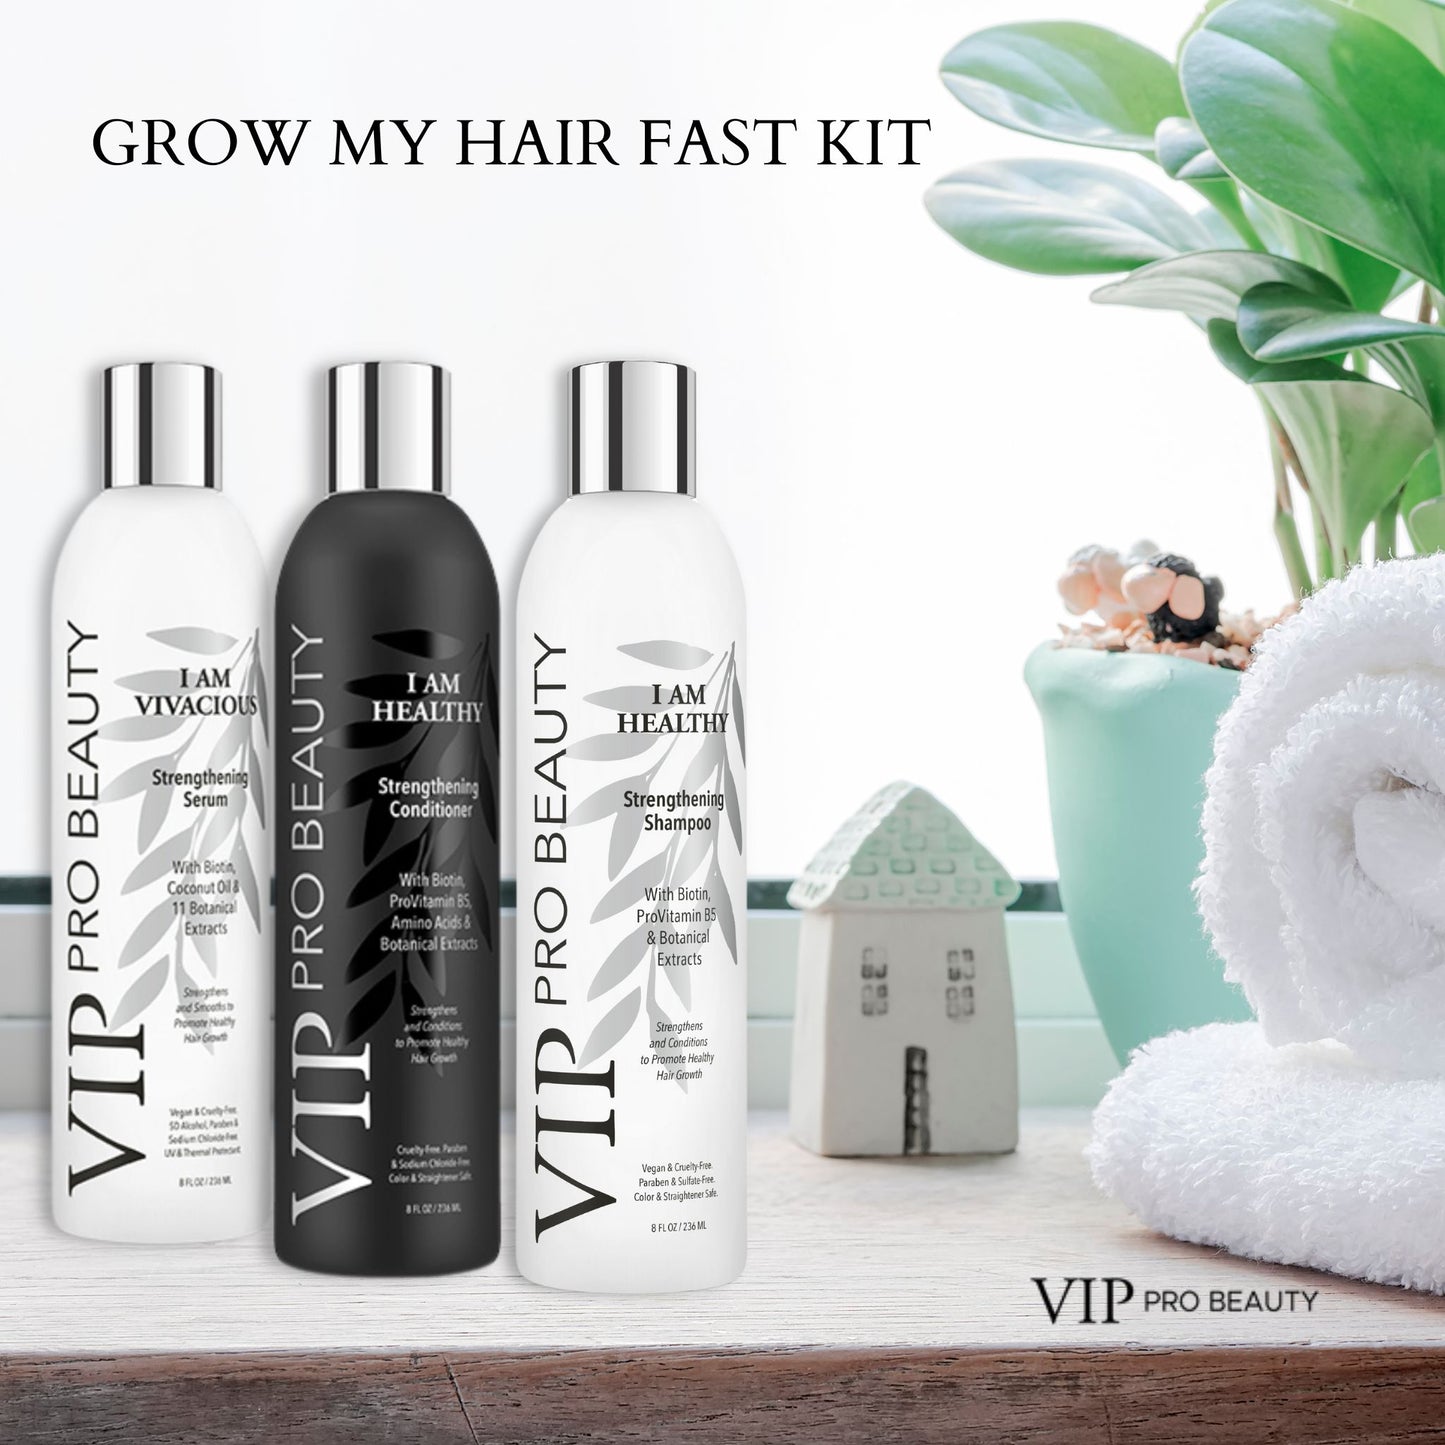 Grow my hair fast kit! 3- products and Free Turban Towel